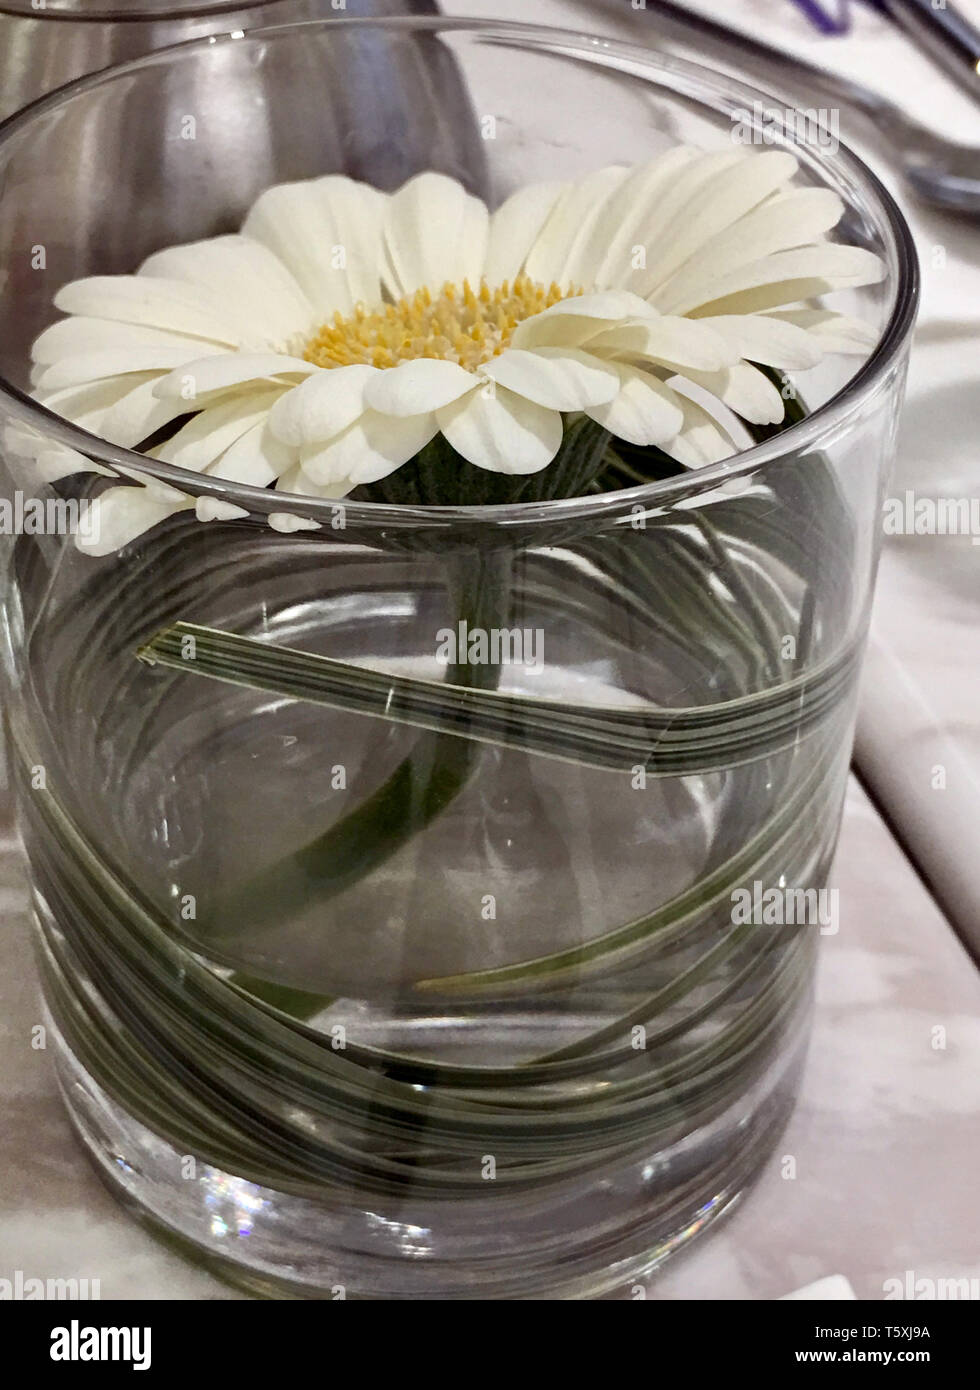 white chrysanthemum in a glass cup Stock Photo